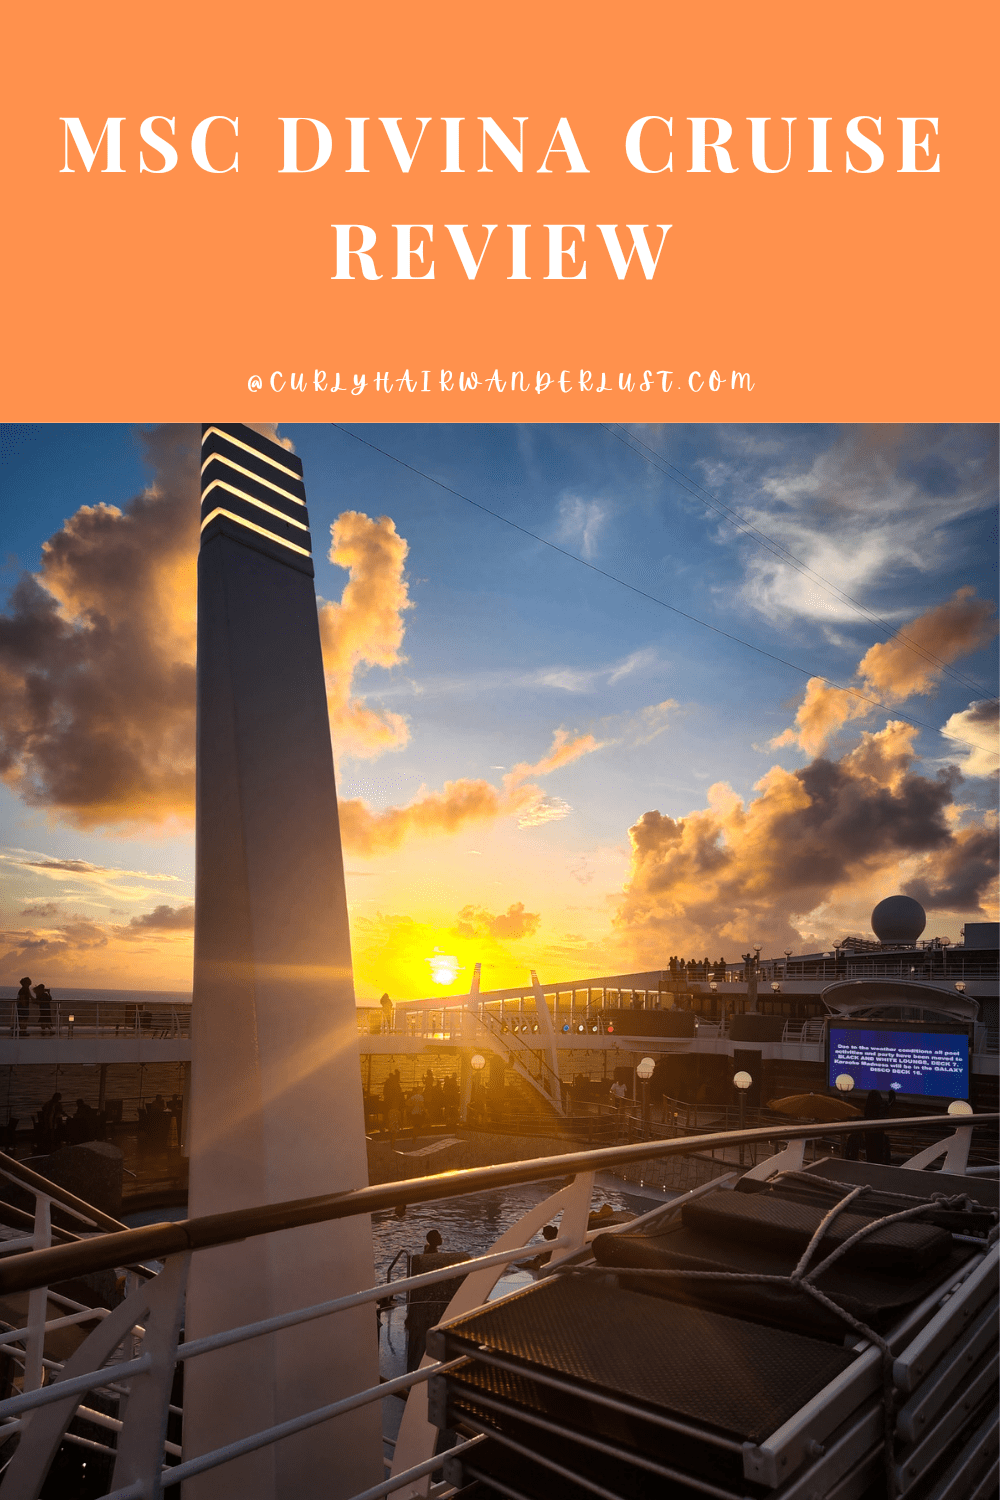 MSC Divinia Cruise review